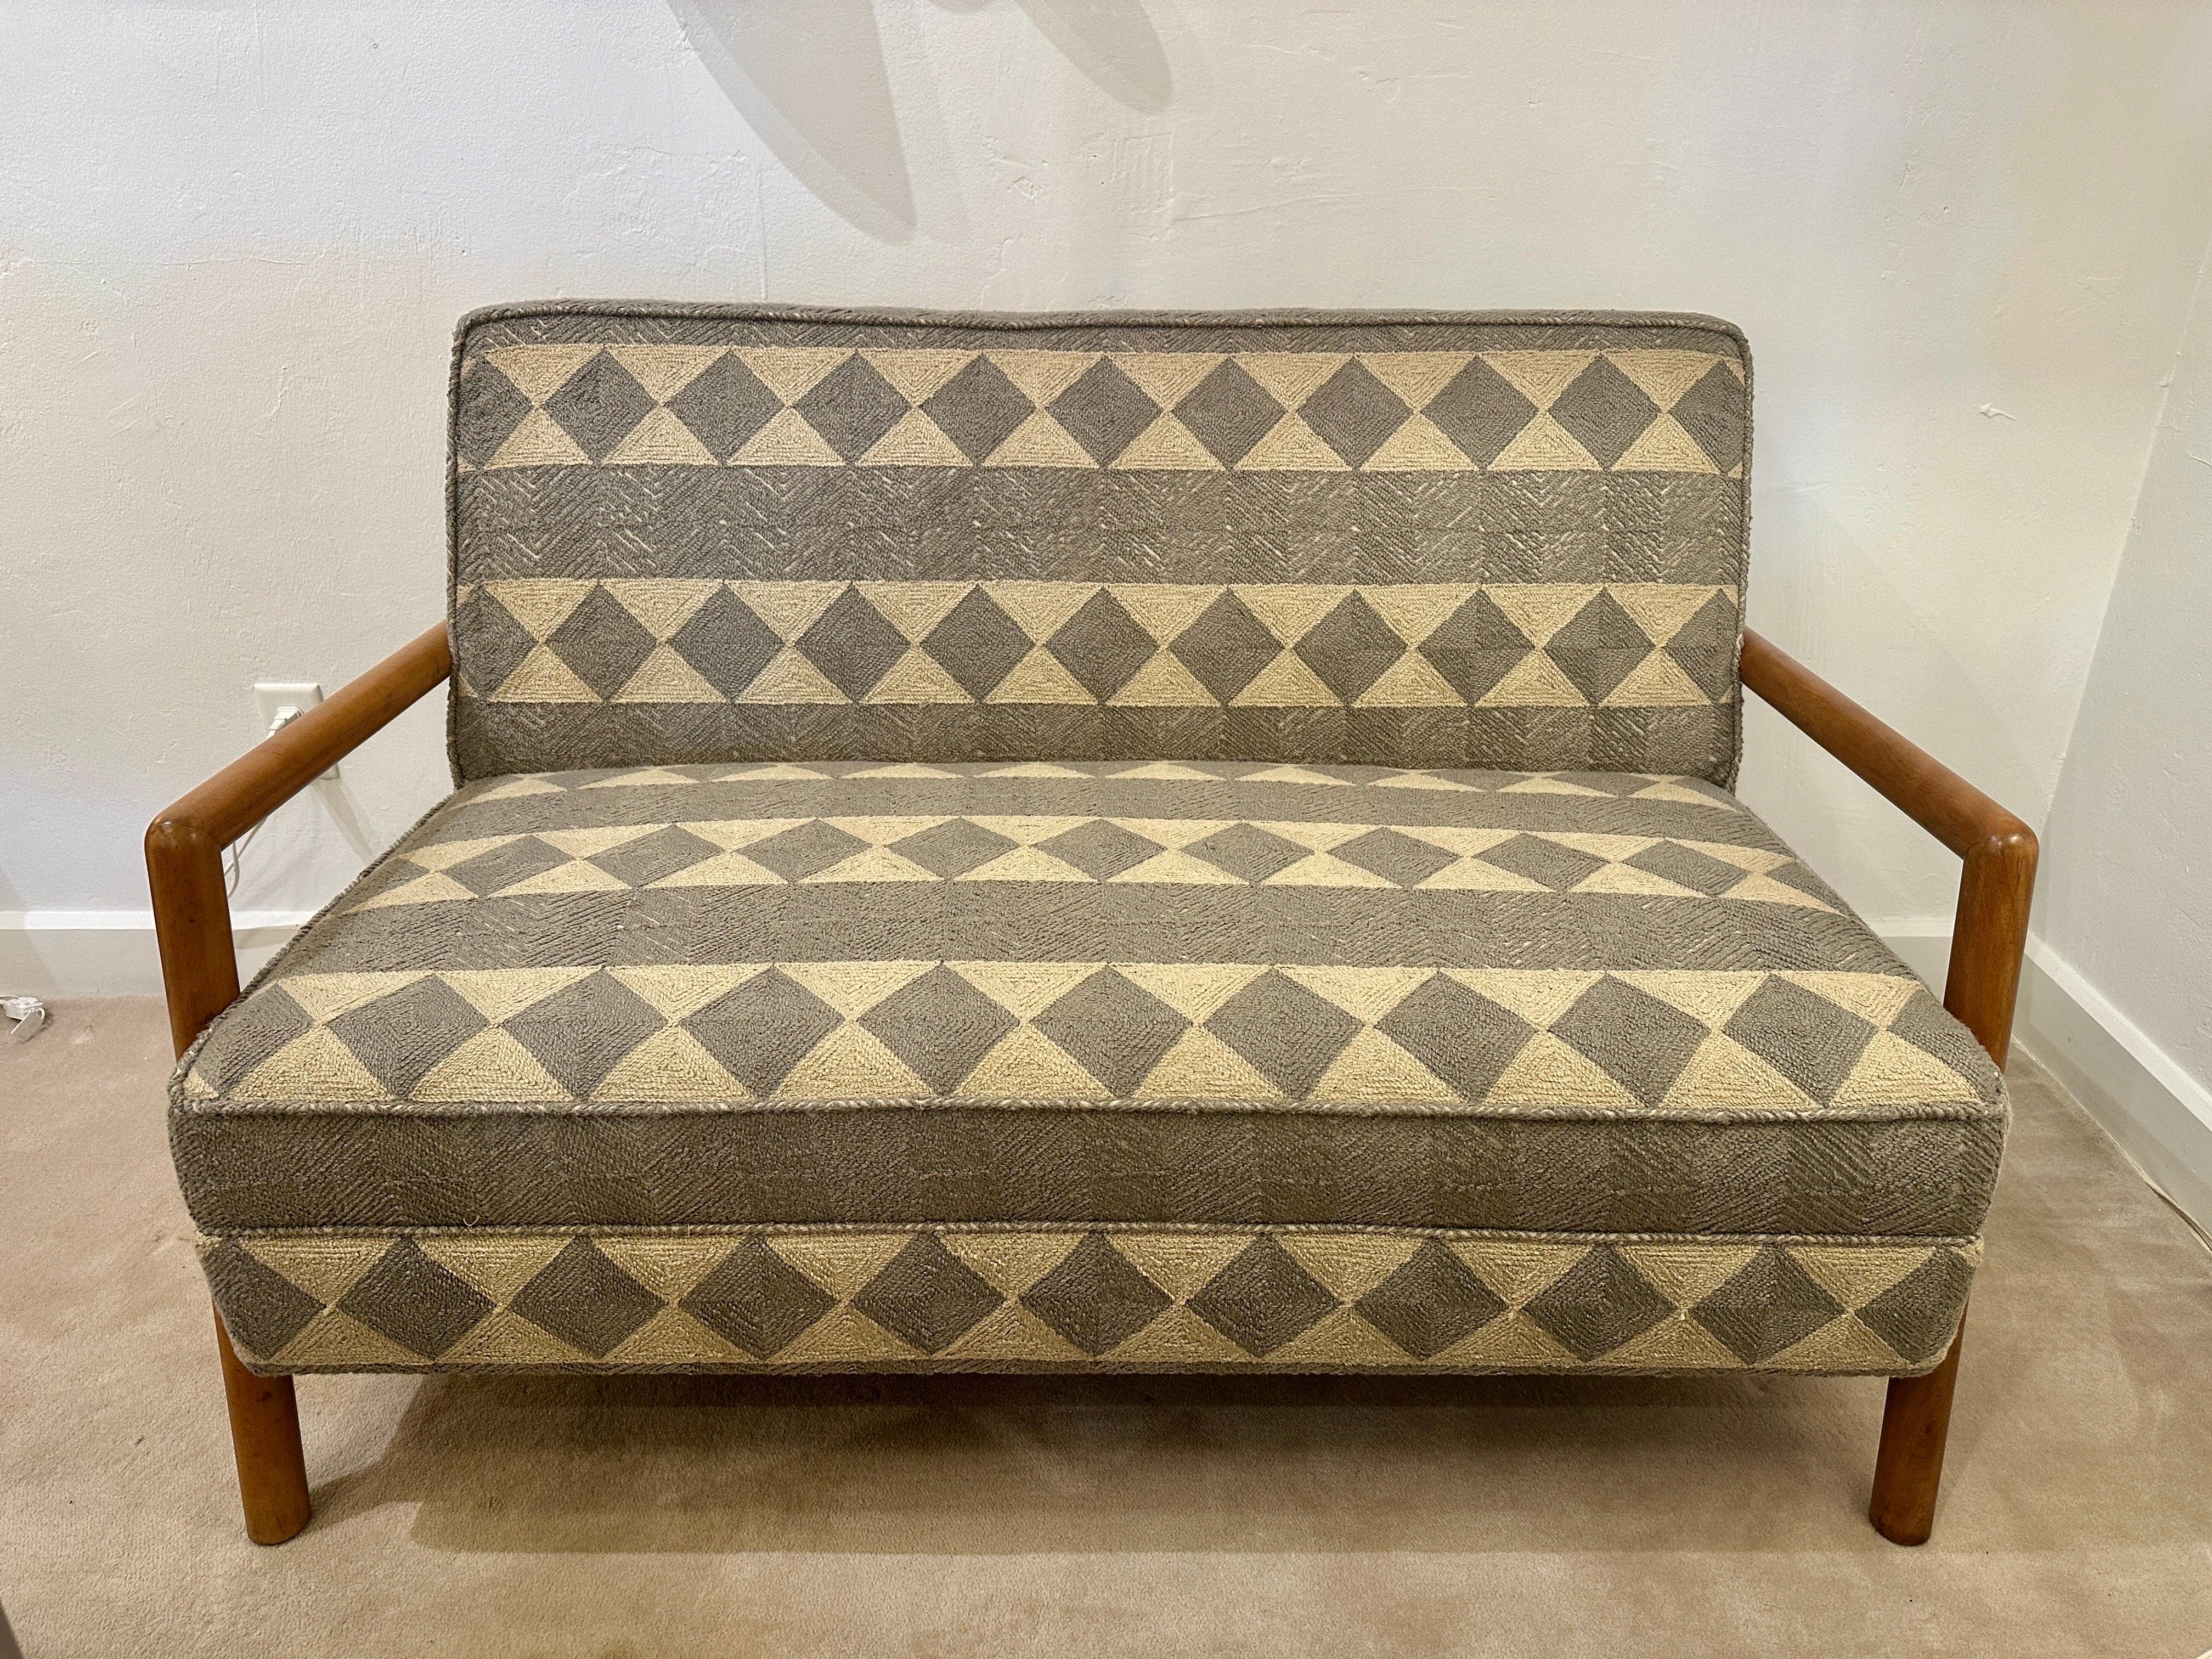 Loveseat by T.H Robsjohn Gibbings, for Widdicomb. This sofa features rounded original solid bleached walnut wood frame with armrests. The cushions have been newly reupholstered in a gray and cream thick woven tribal style fabric.

Dimensions: 53.5